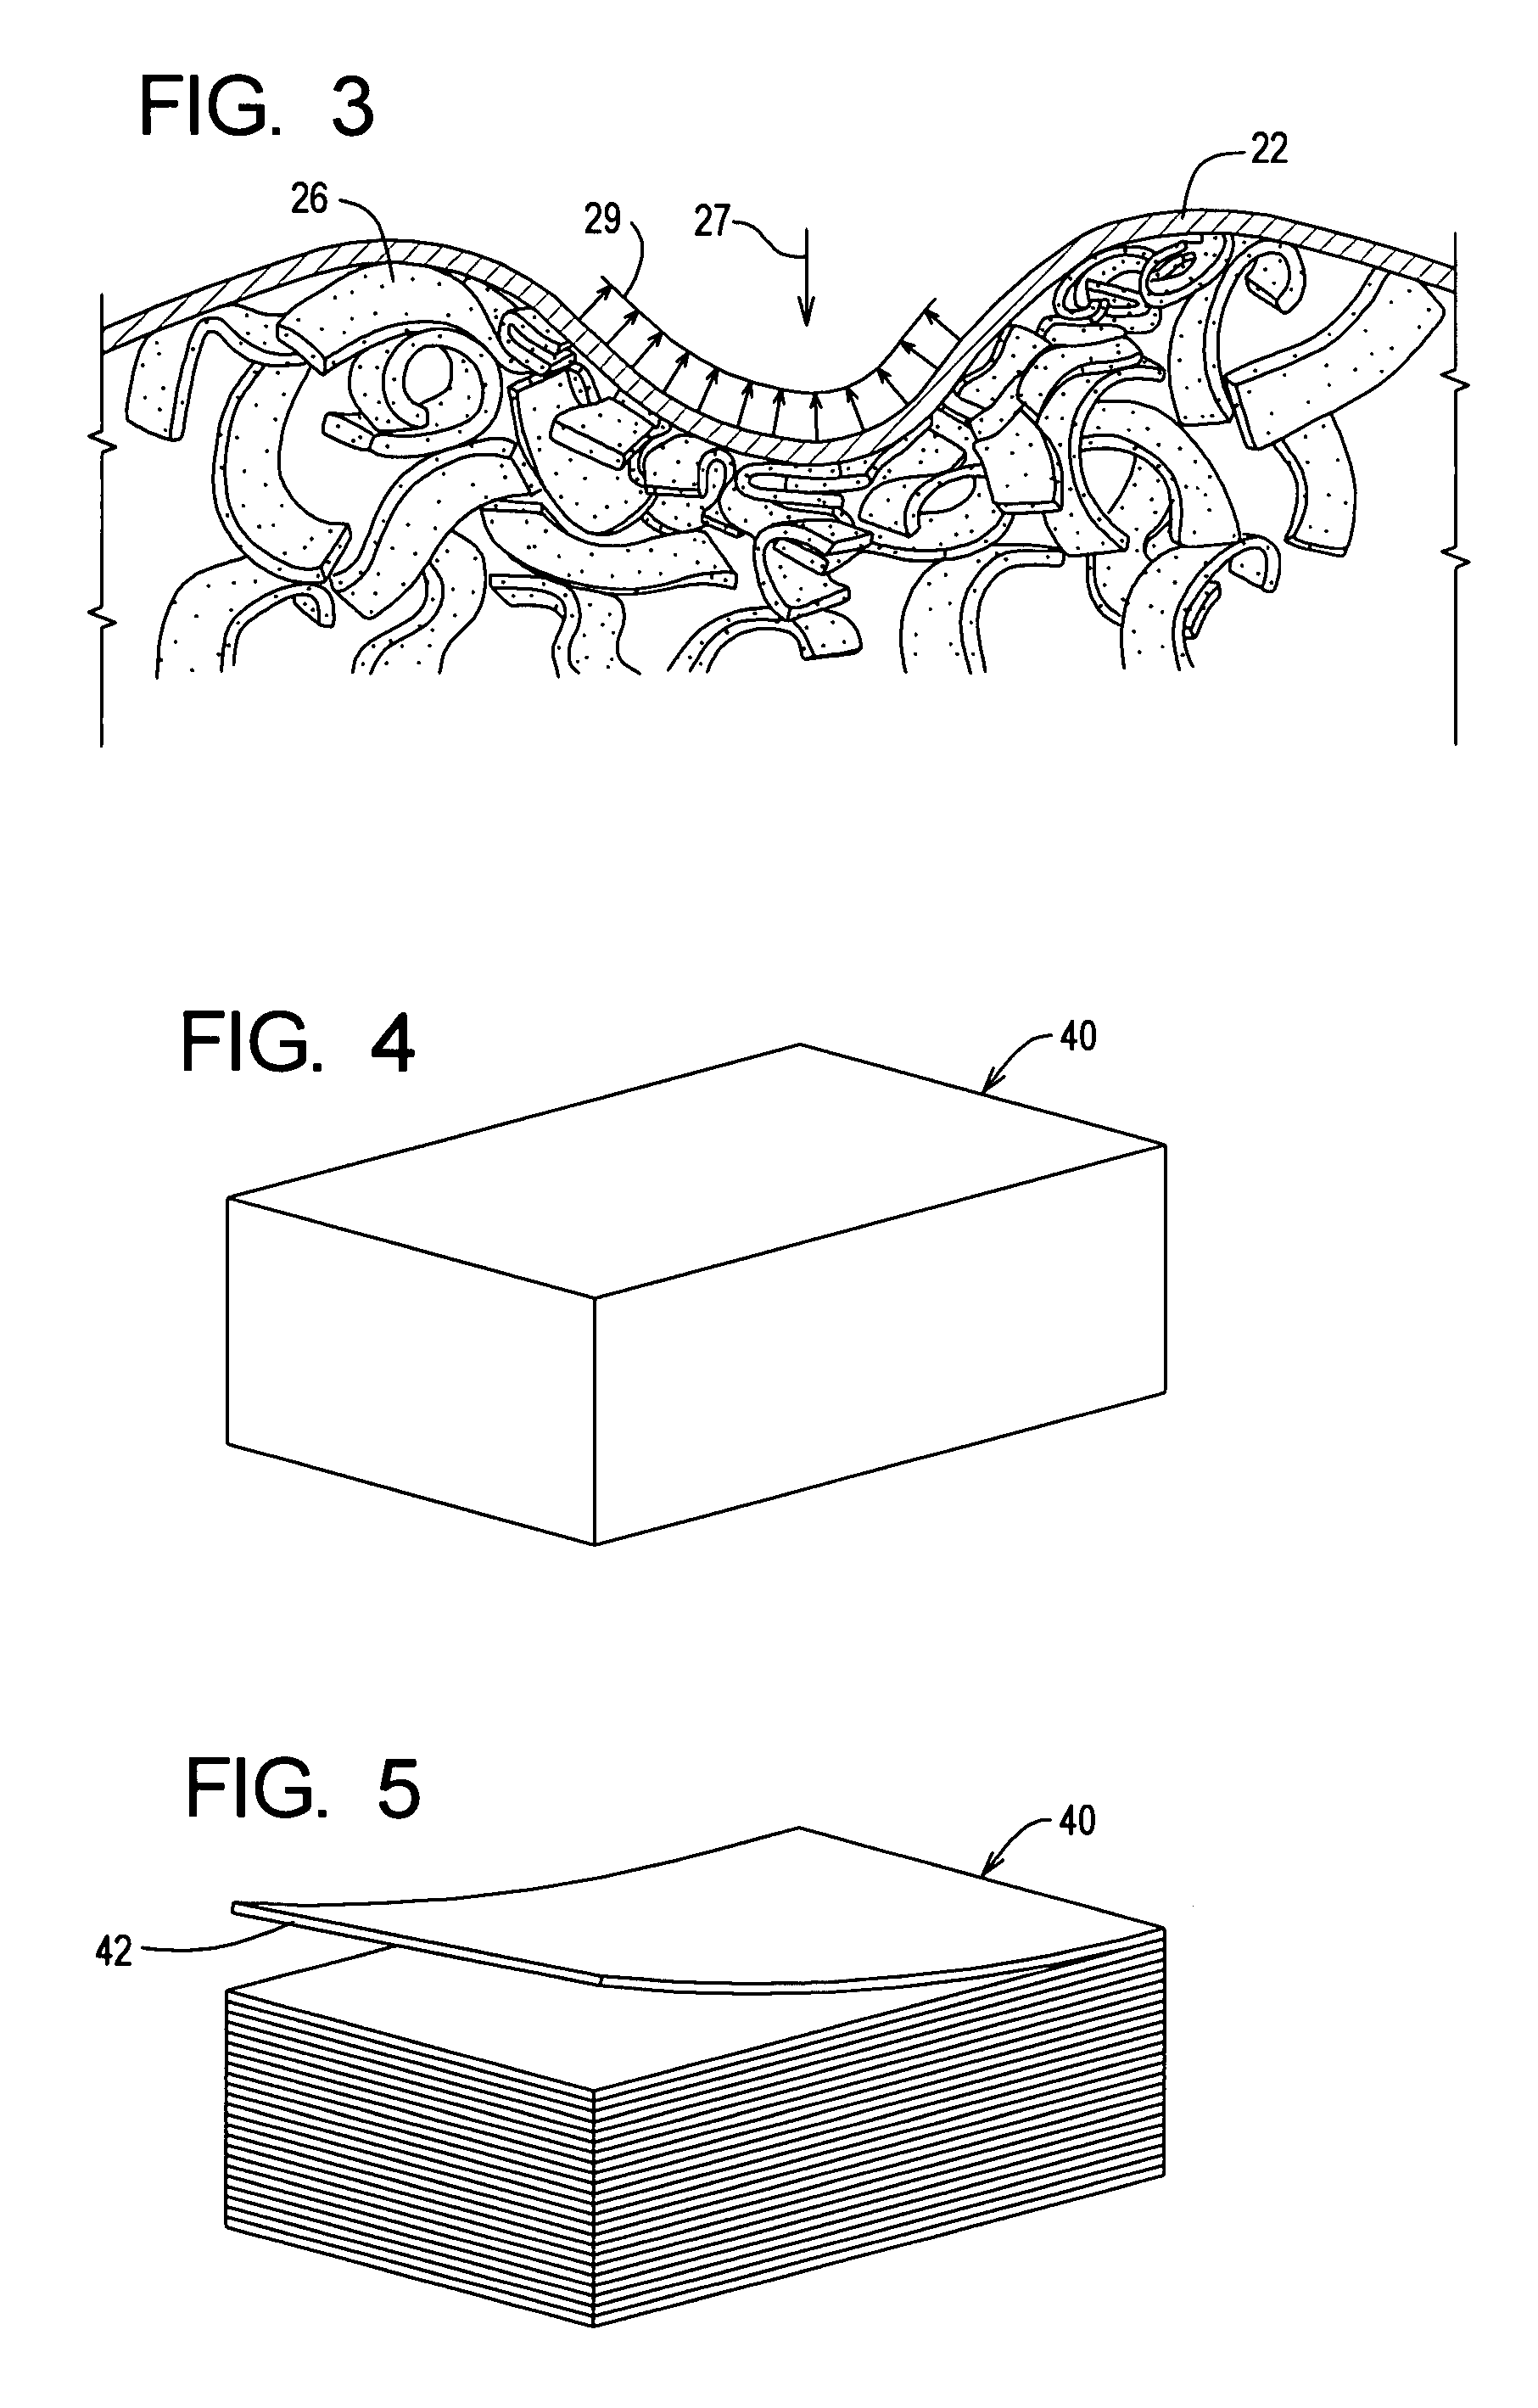 Reticulated open cell filling material